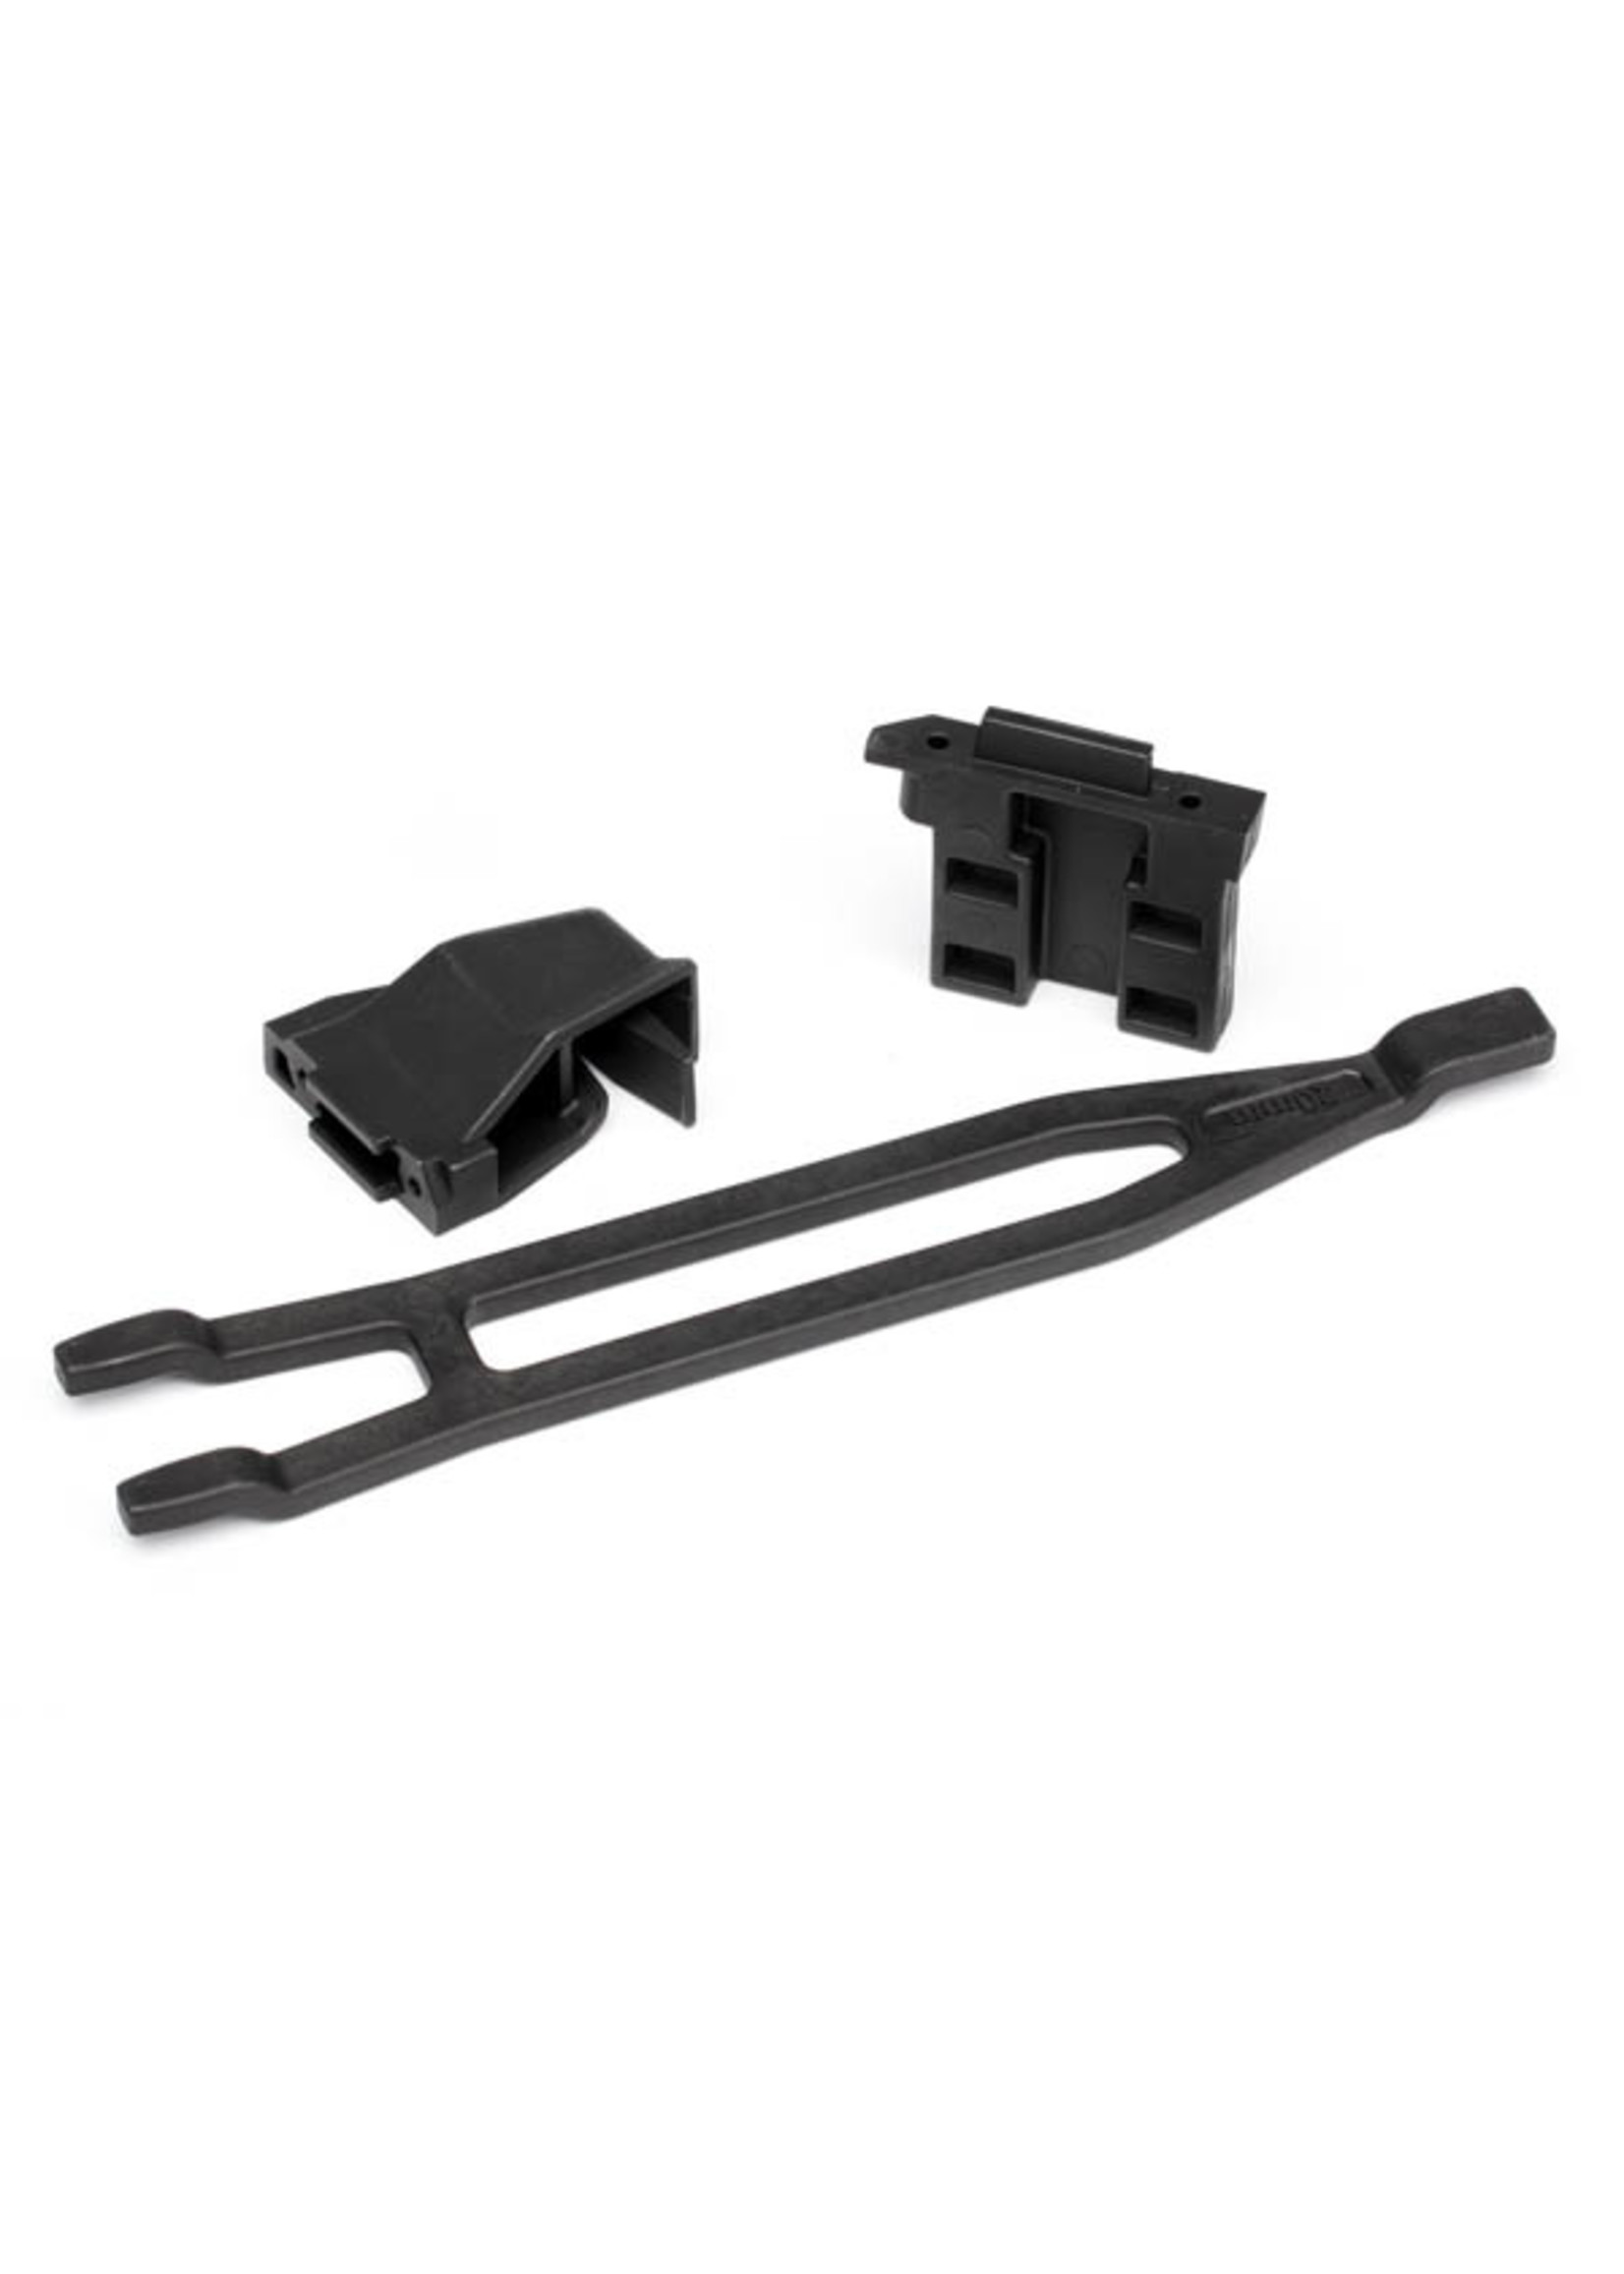 Traxxas 7426X - Battery Hold Downs, Front and Rear